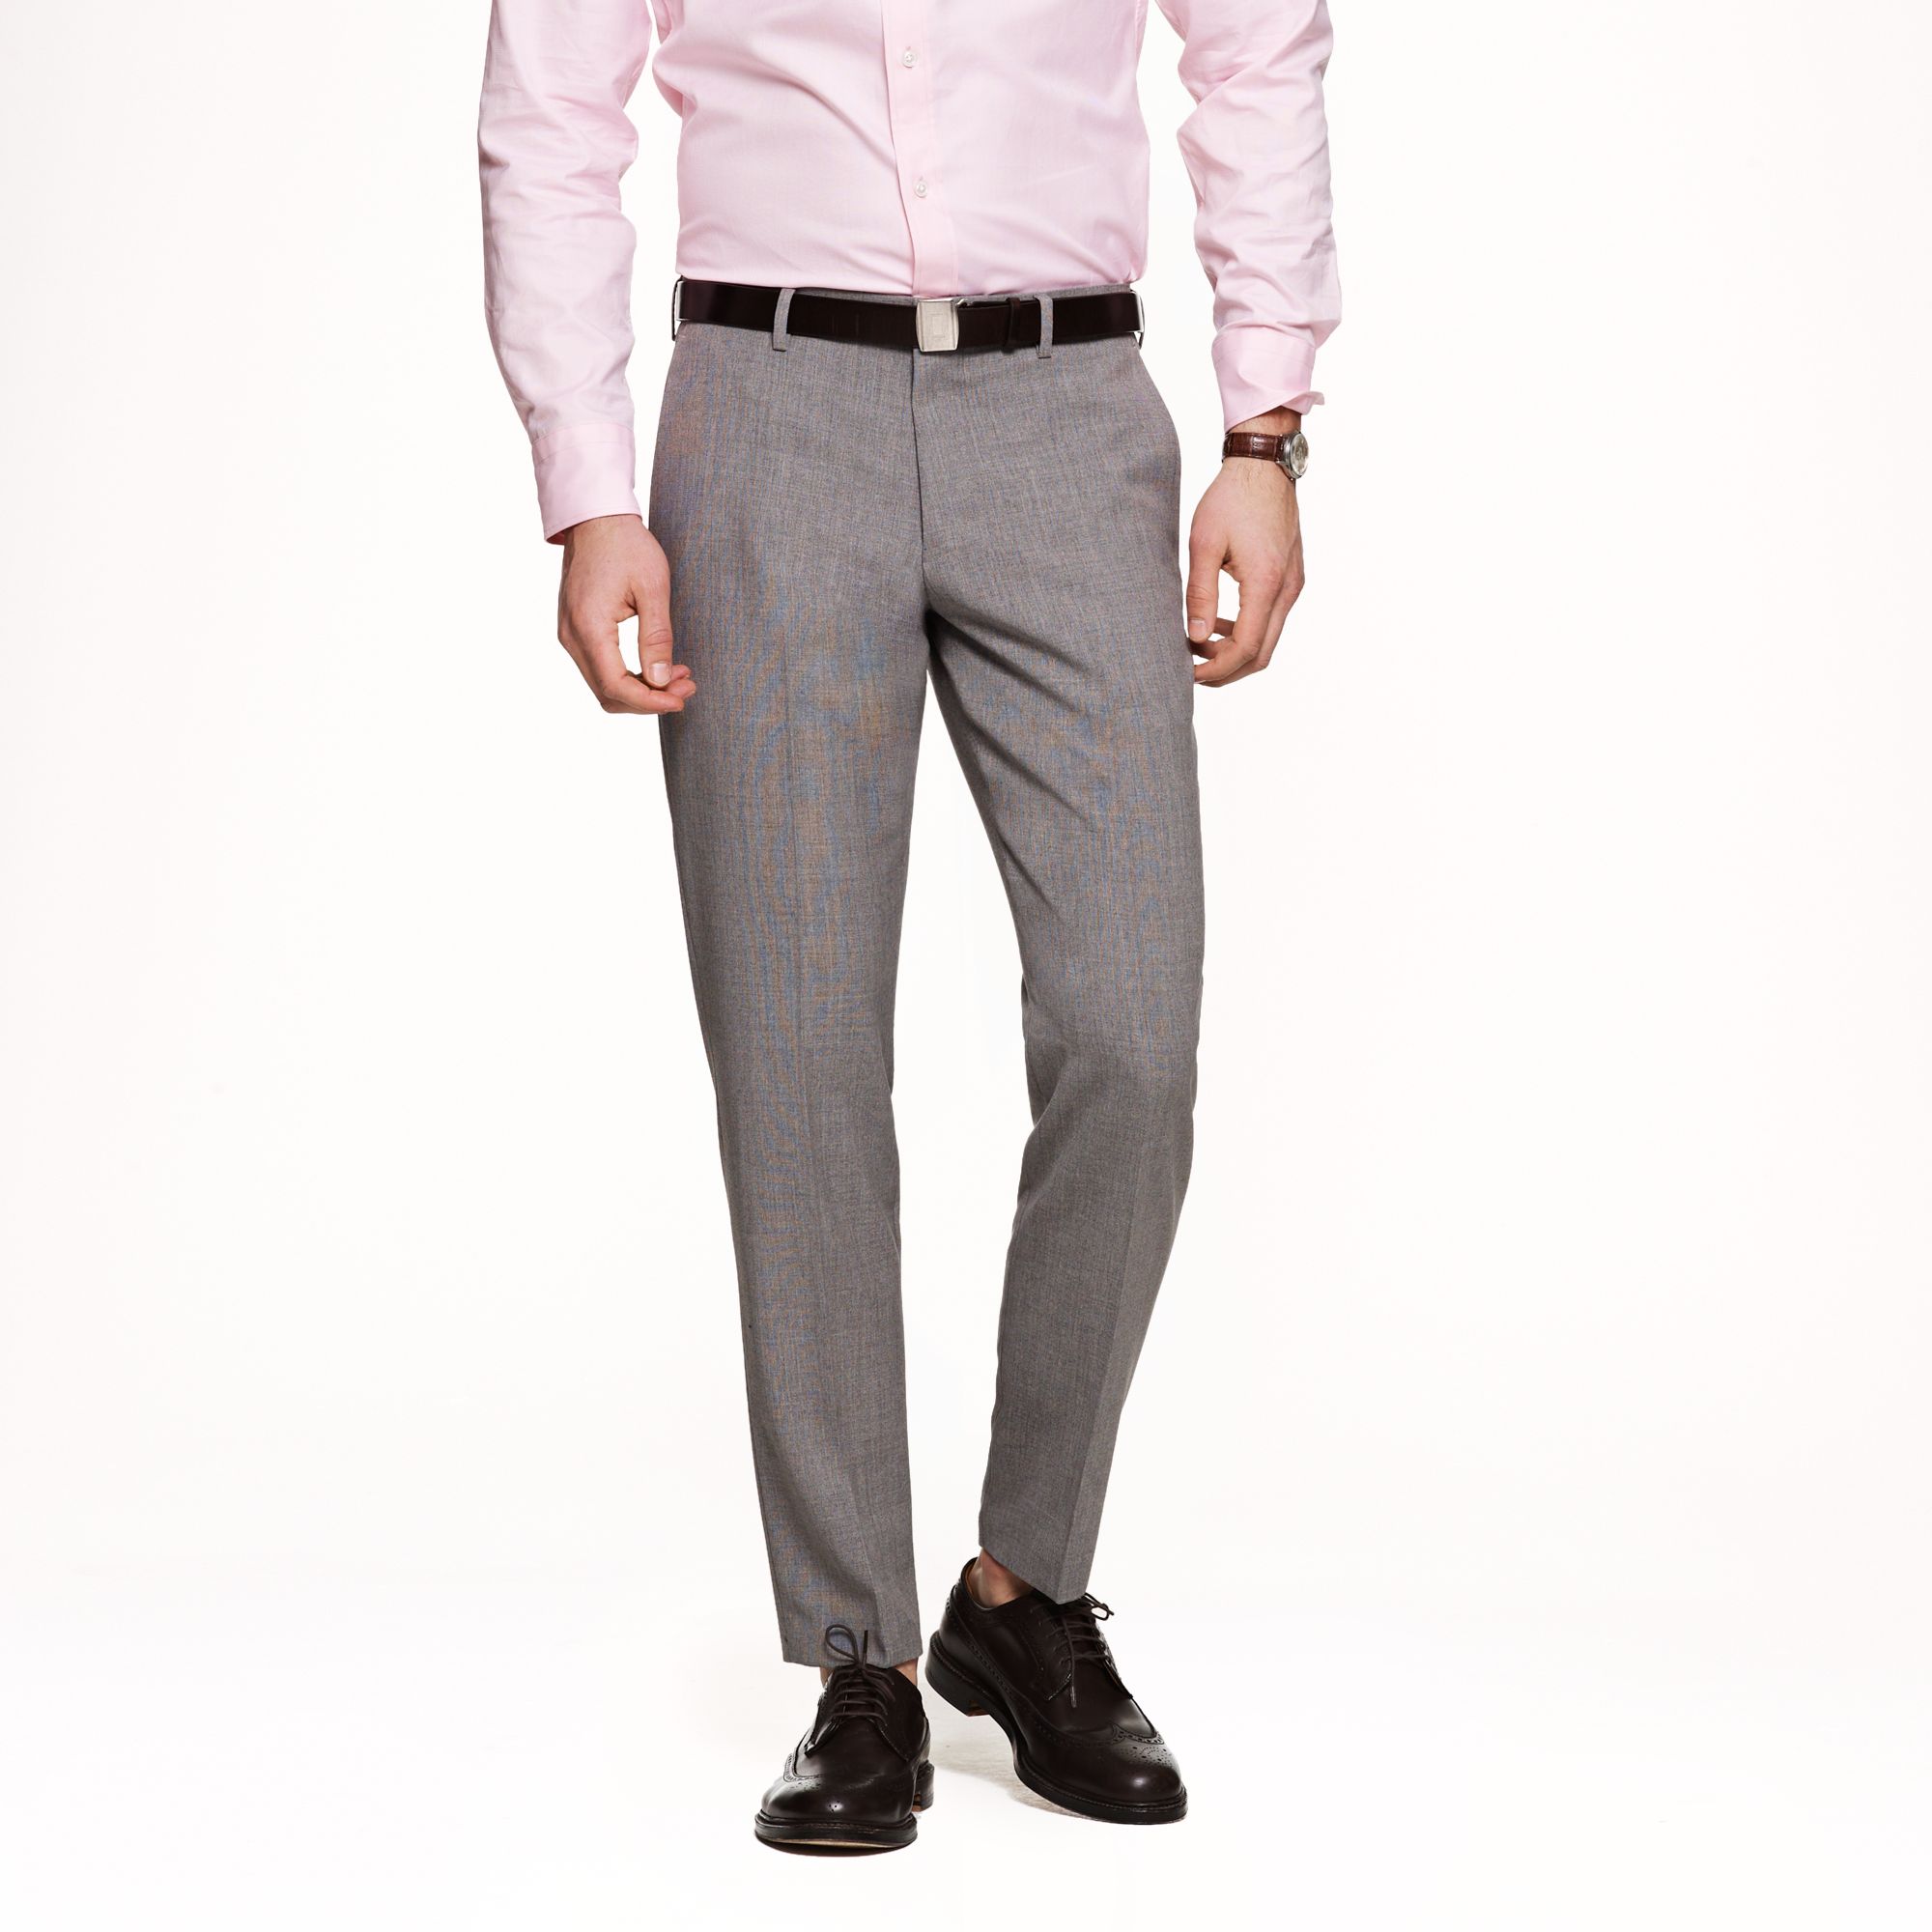 J.crew Ludlow Slim Suit Pant in Light Charcoal Italian Worsted Wool in ...